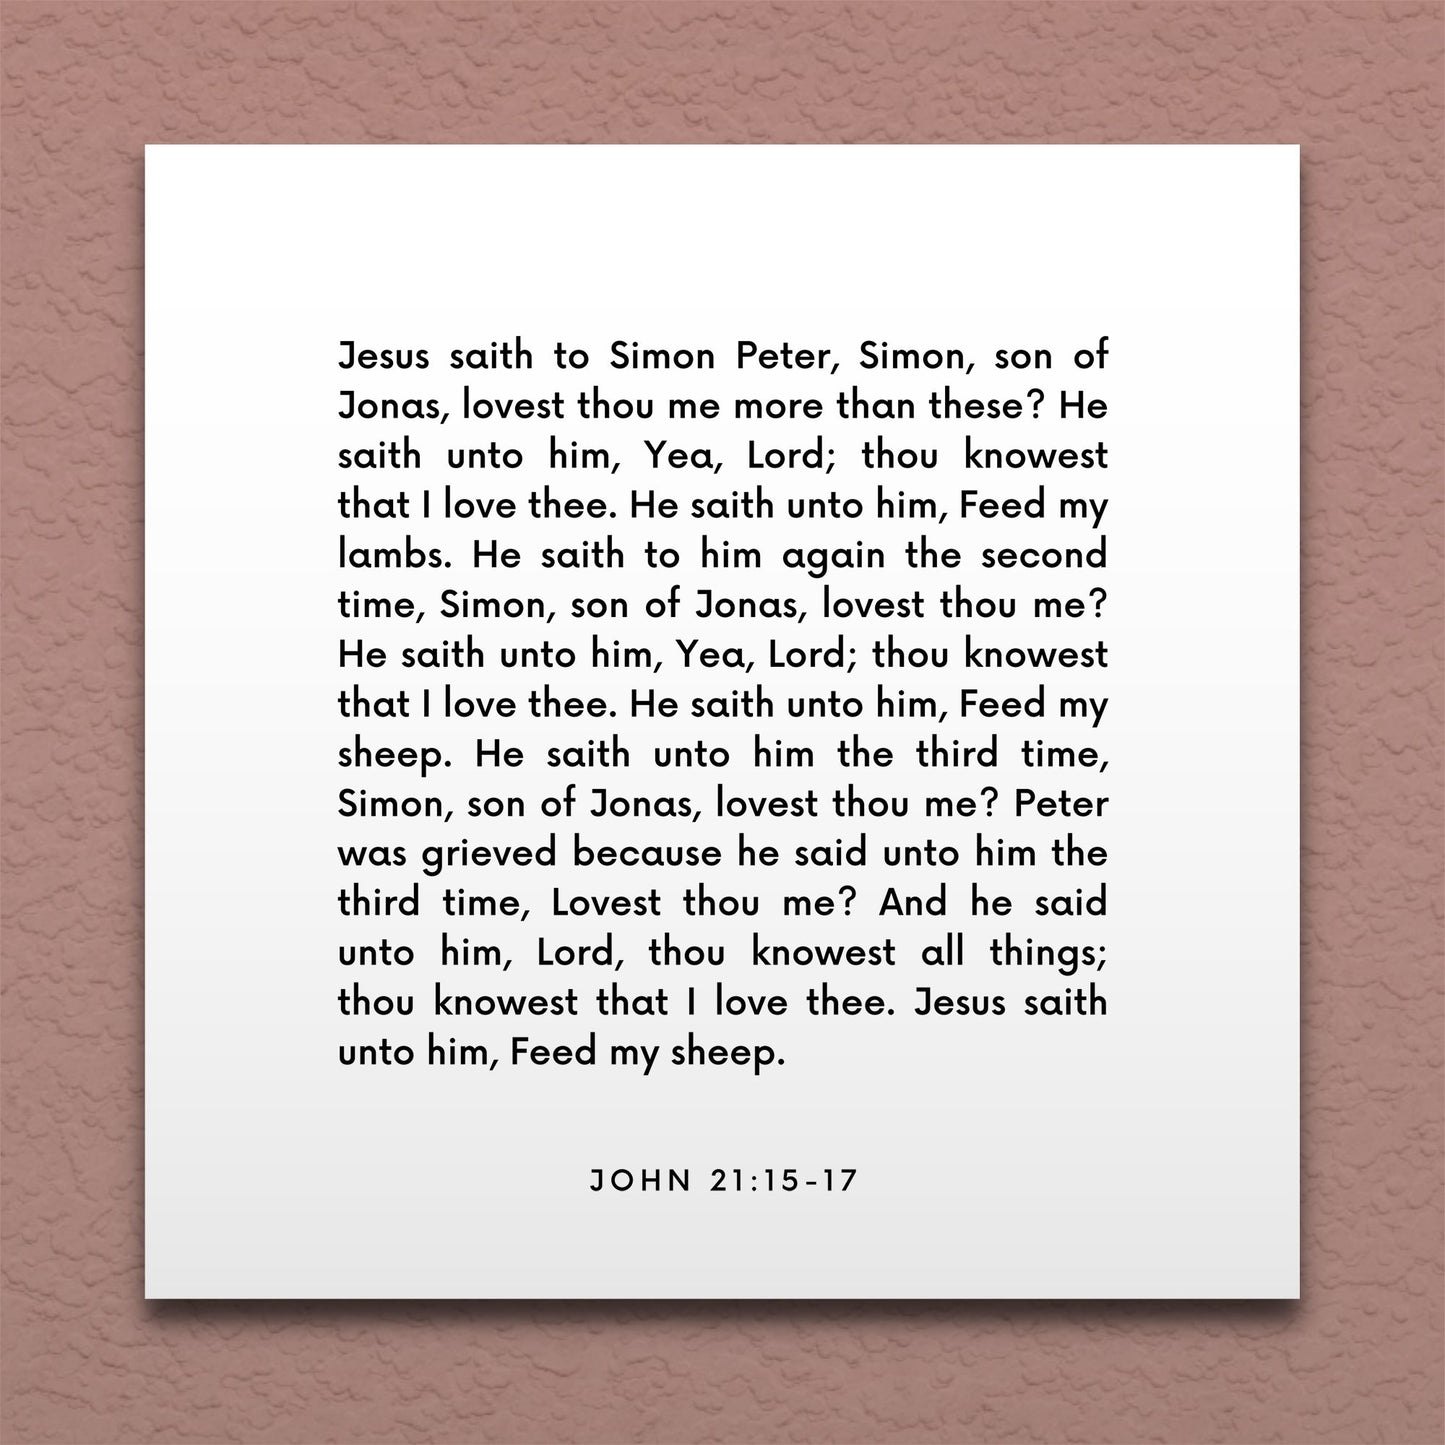 Wall-mounted scripture tile for John 21:15-17 - "Lord, thou knowest that I love thee"